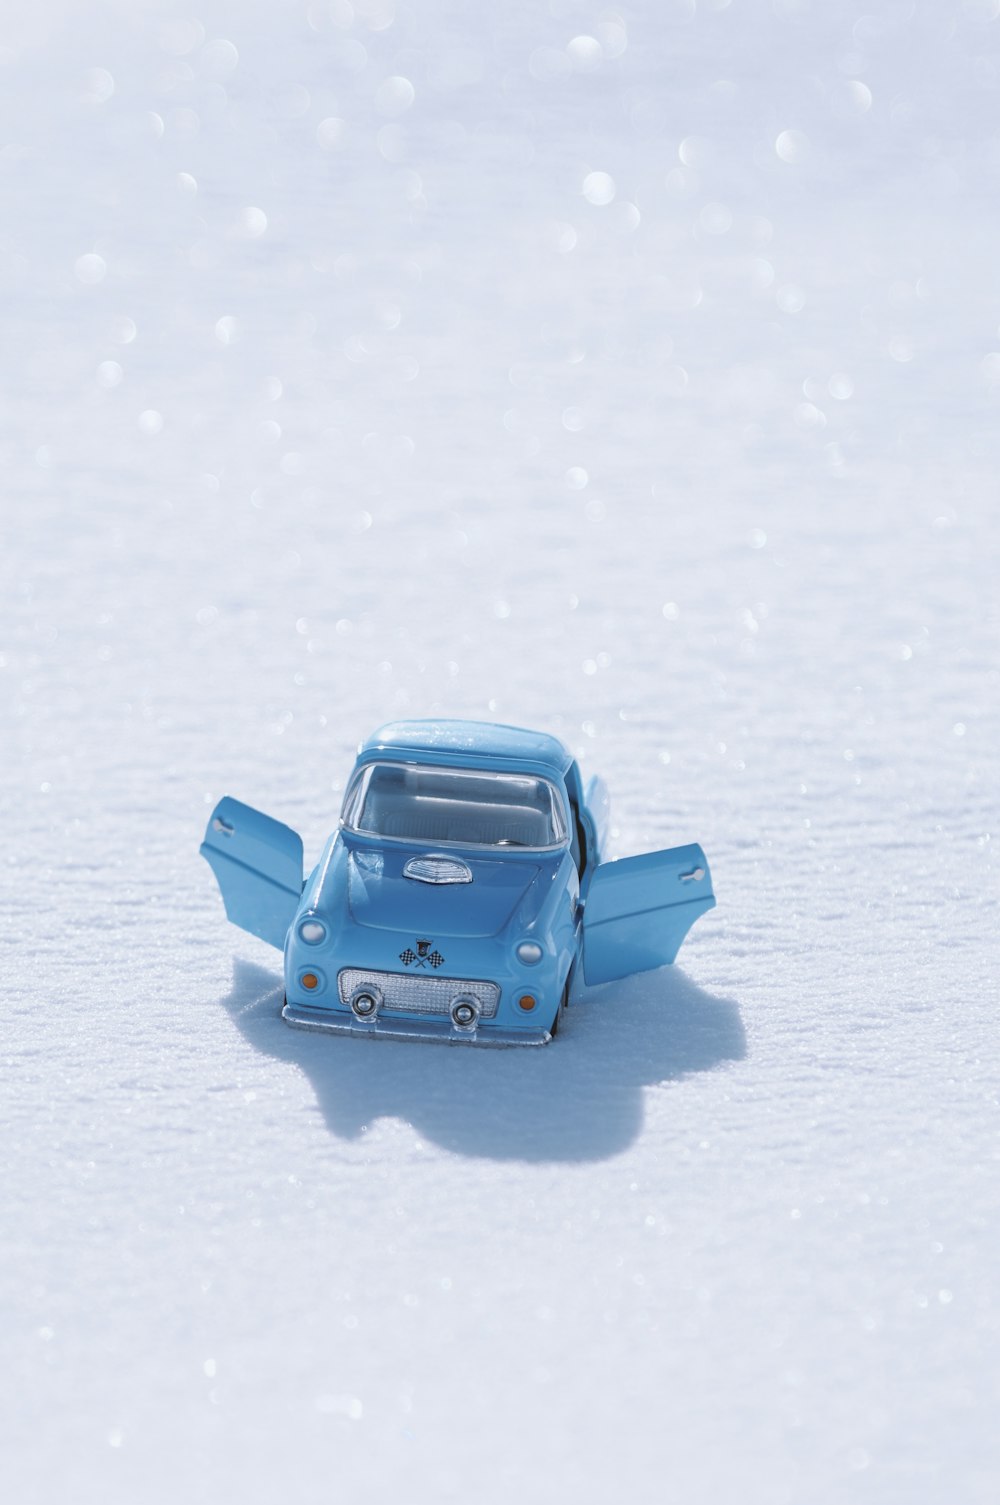 blue volkswagen beetle on snow covered ground during daytime